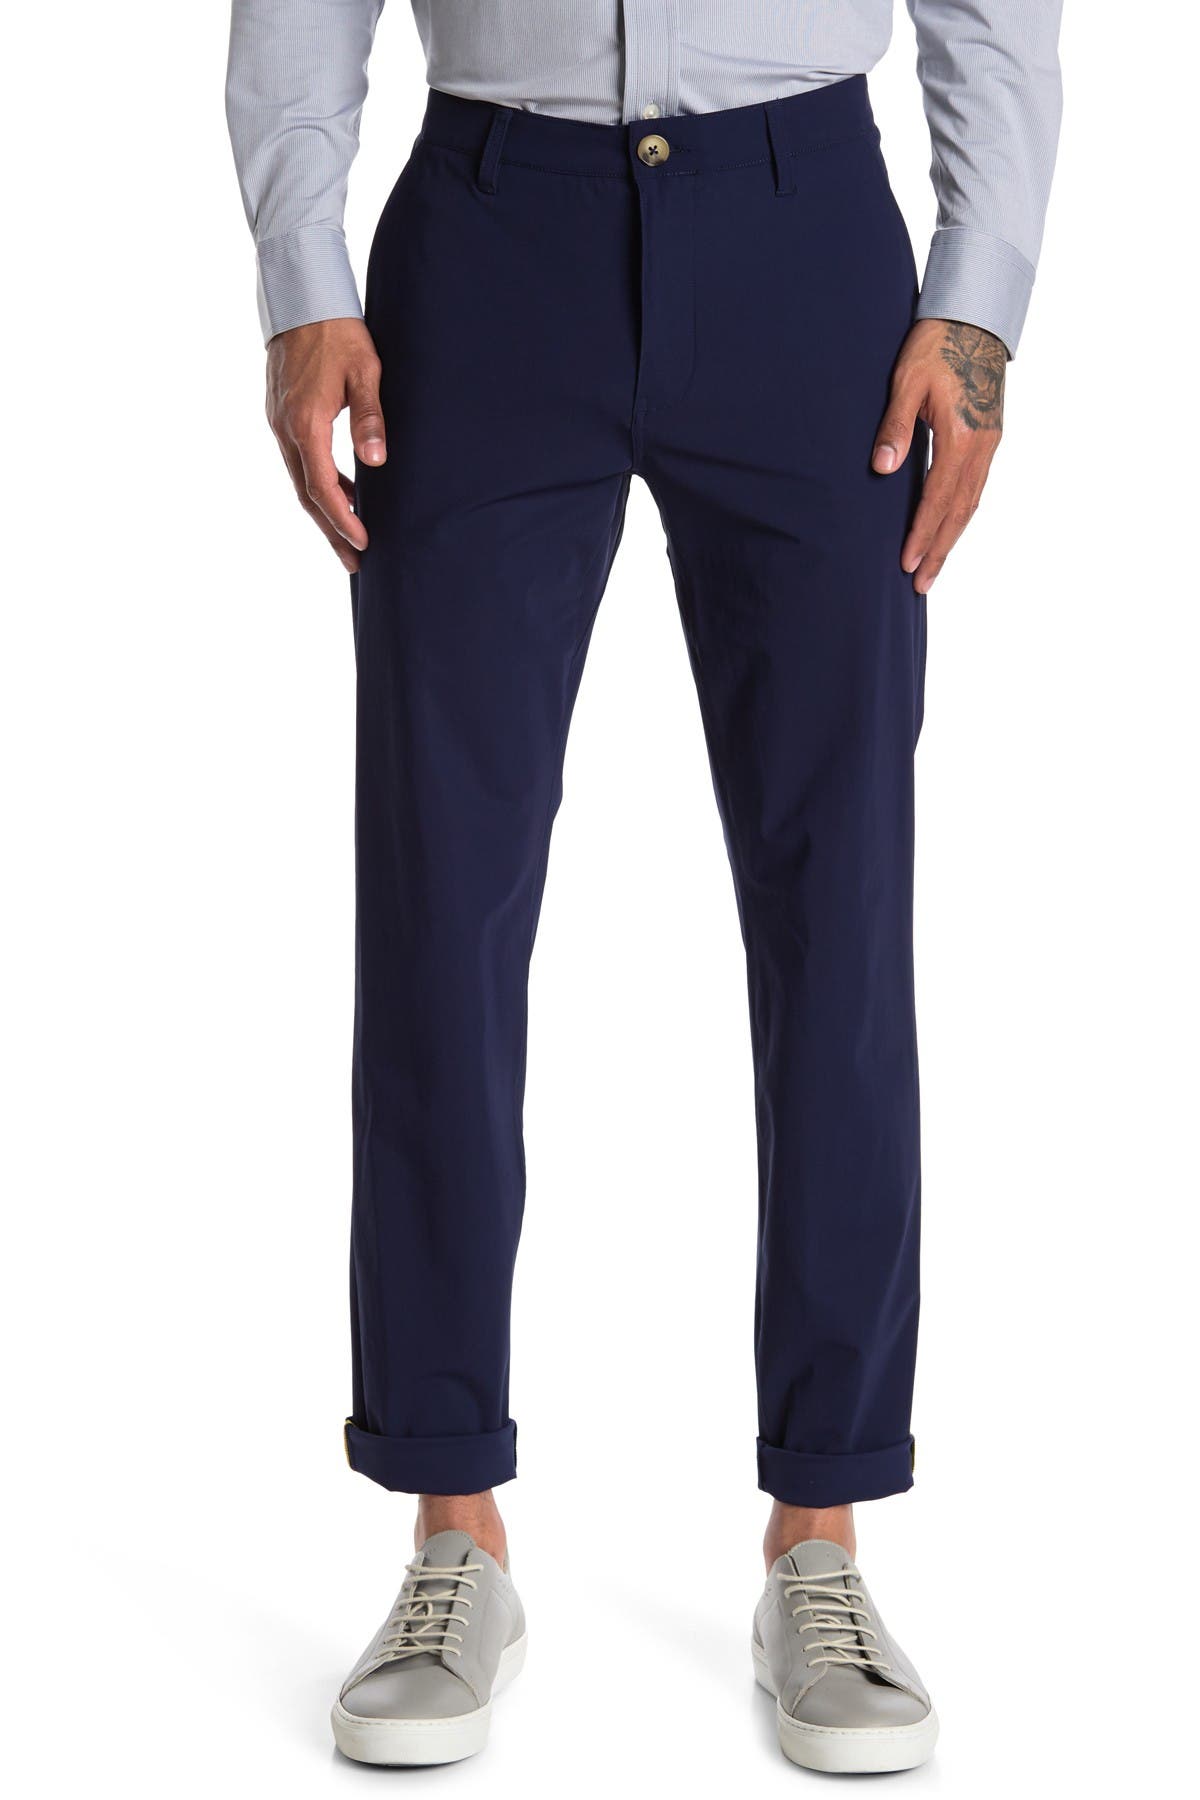 Rhone Eco Legend Chino Pants In Navy1